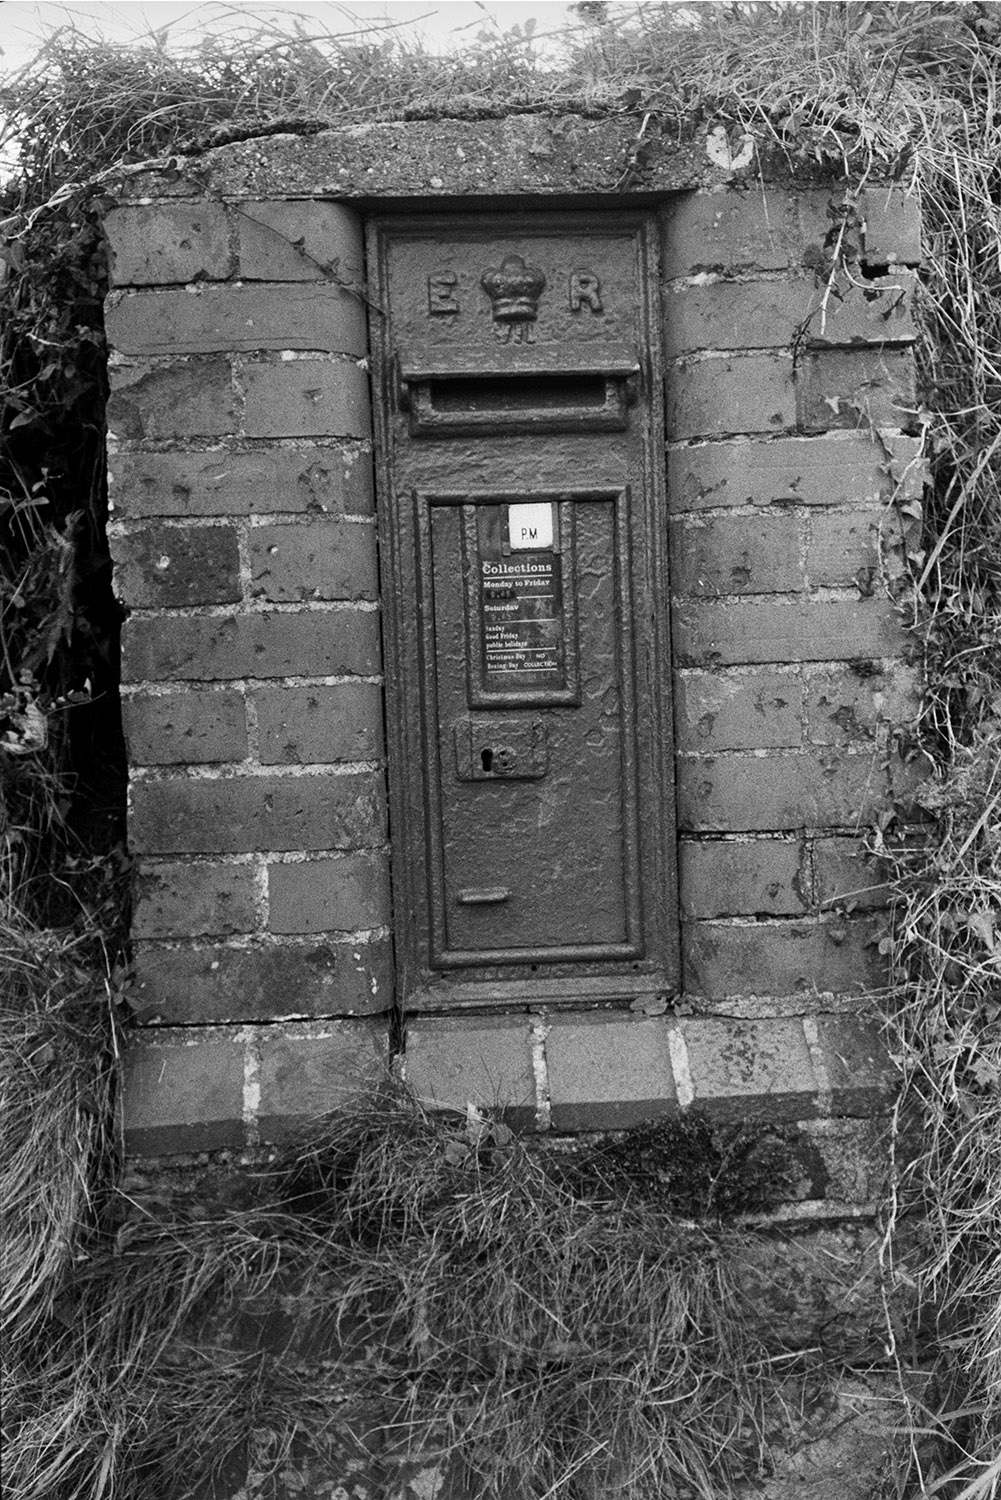 A post box in an overgrown stone wall at Beaford.